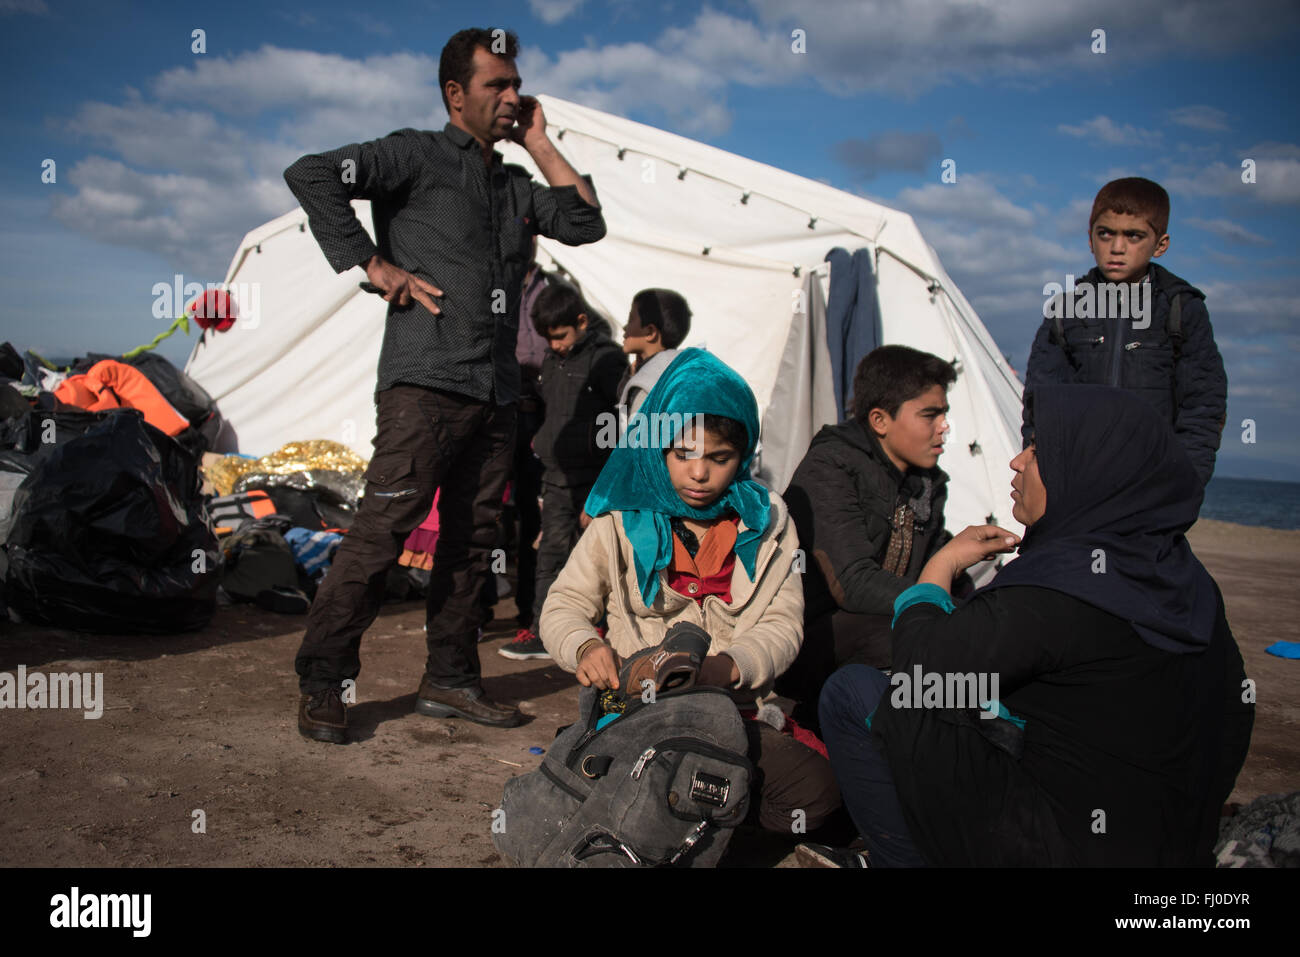 Refugees arriving on the shores of Efthalou, Lesbos in Greece. Stock Photo